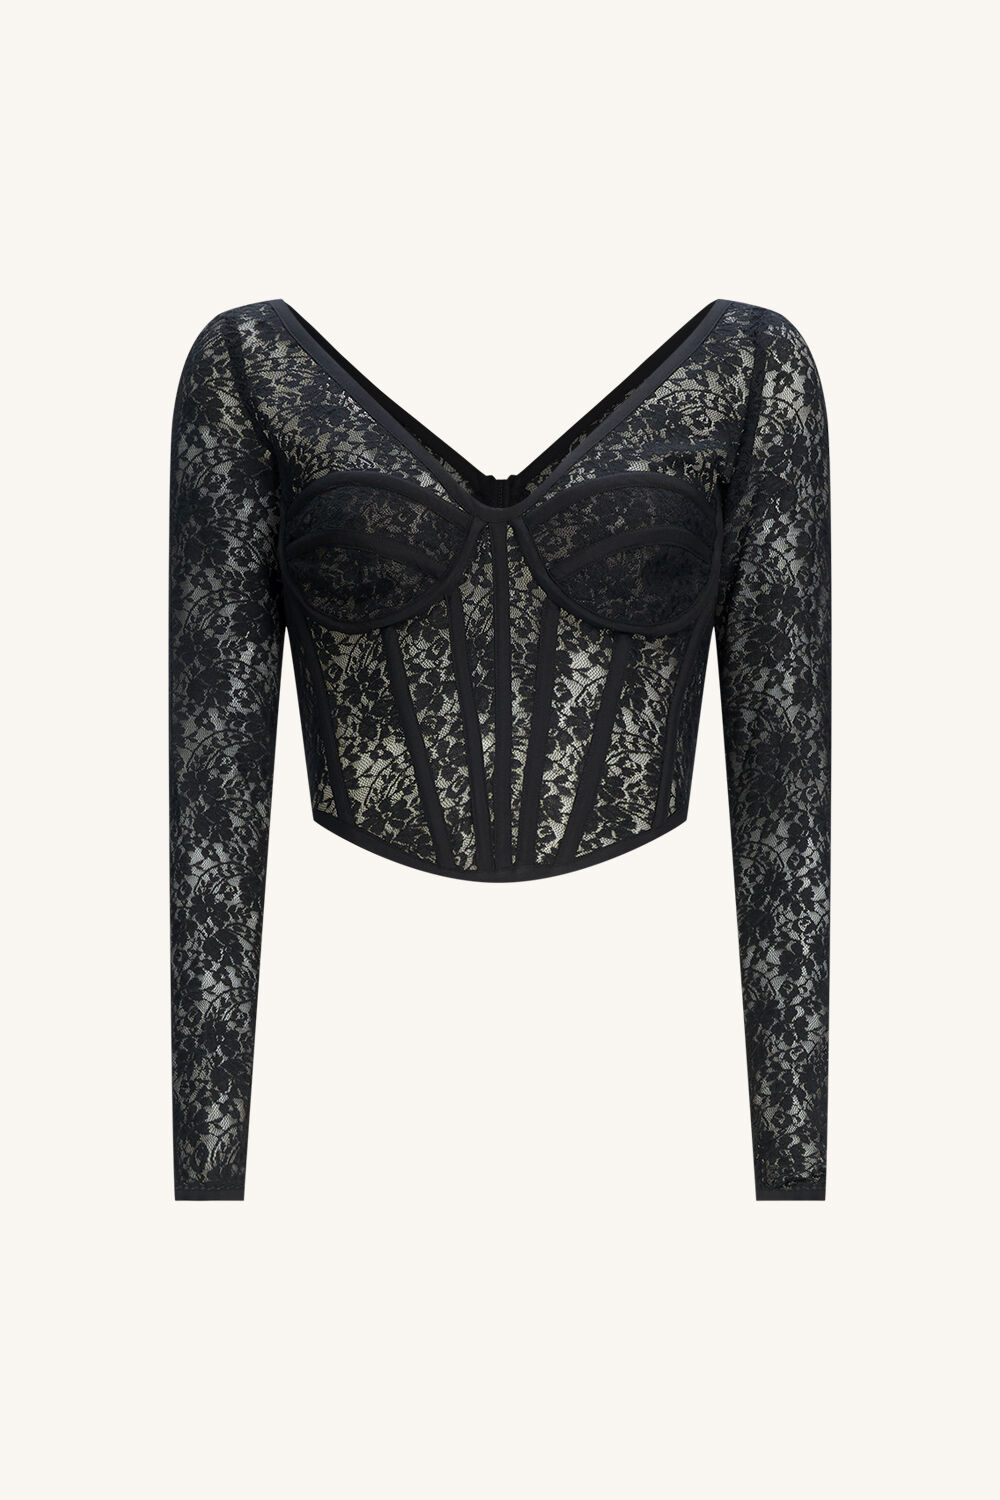 Long-sleeved lace corset top in Black for